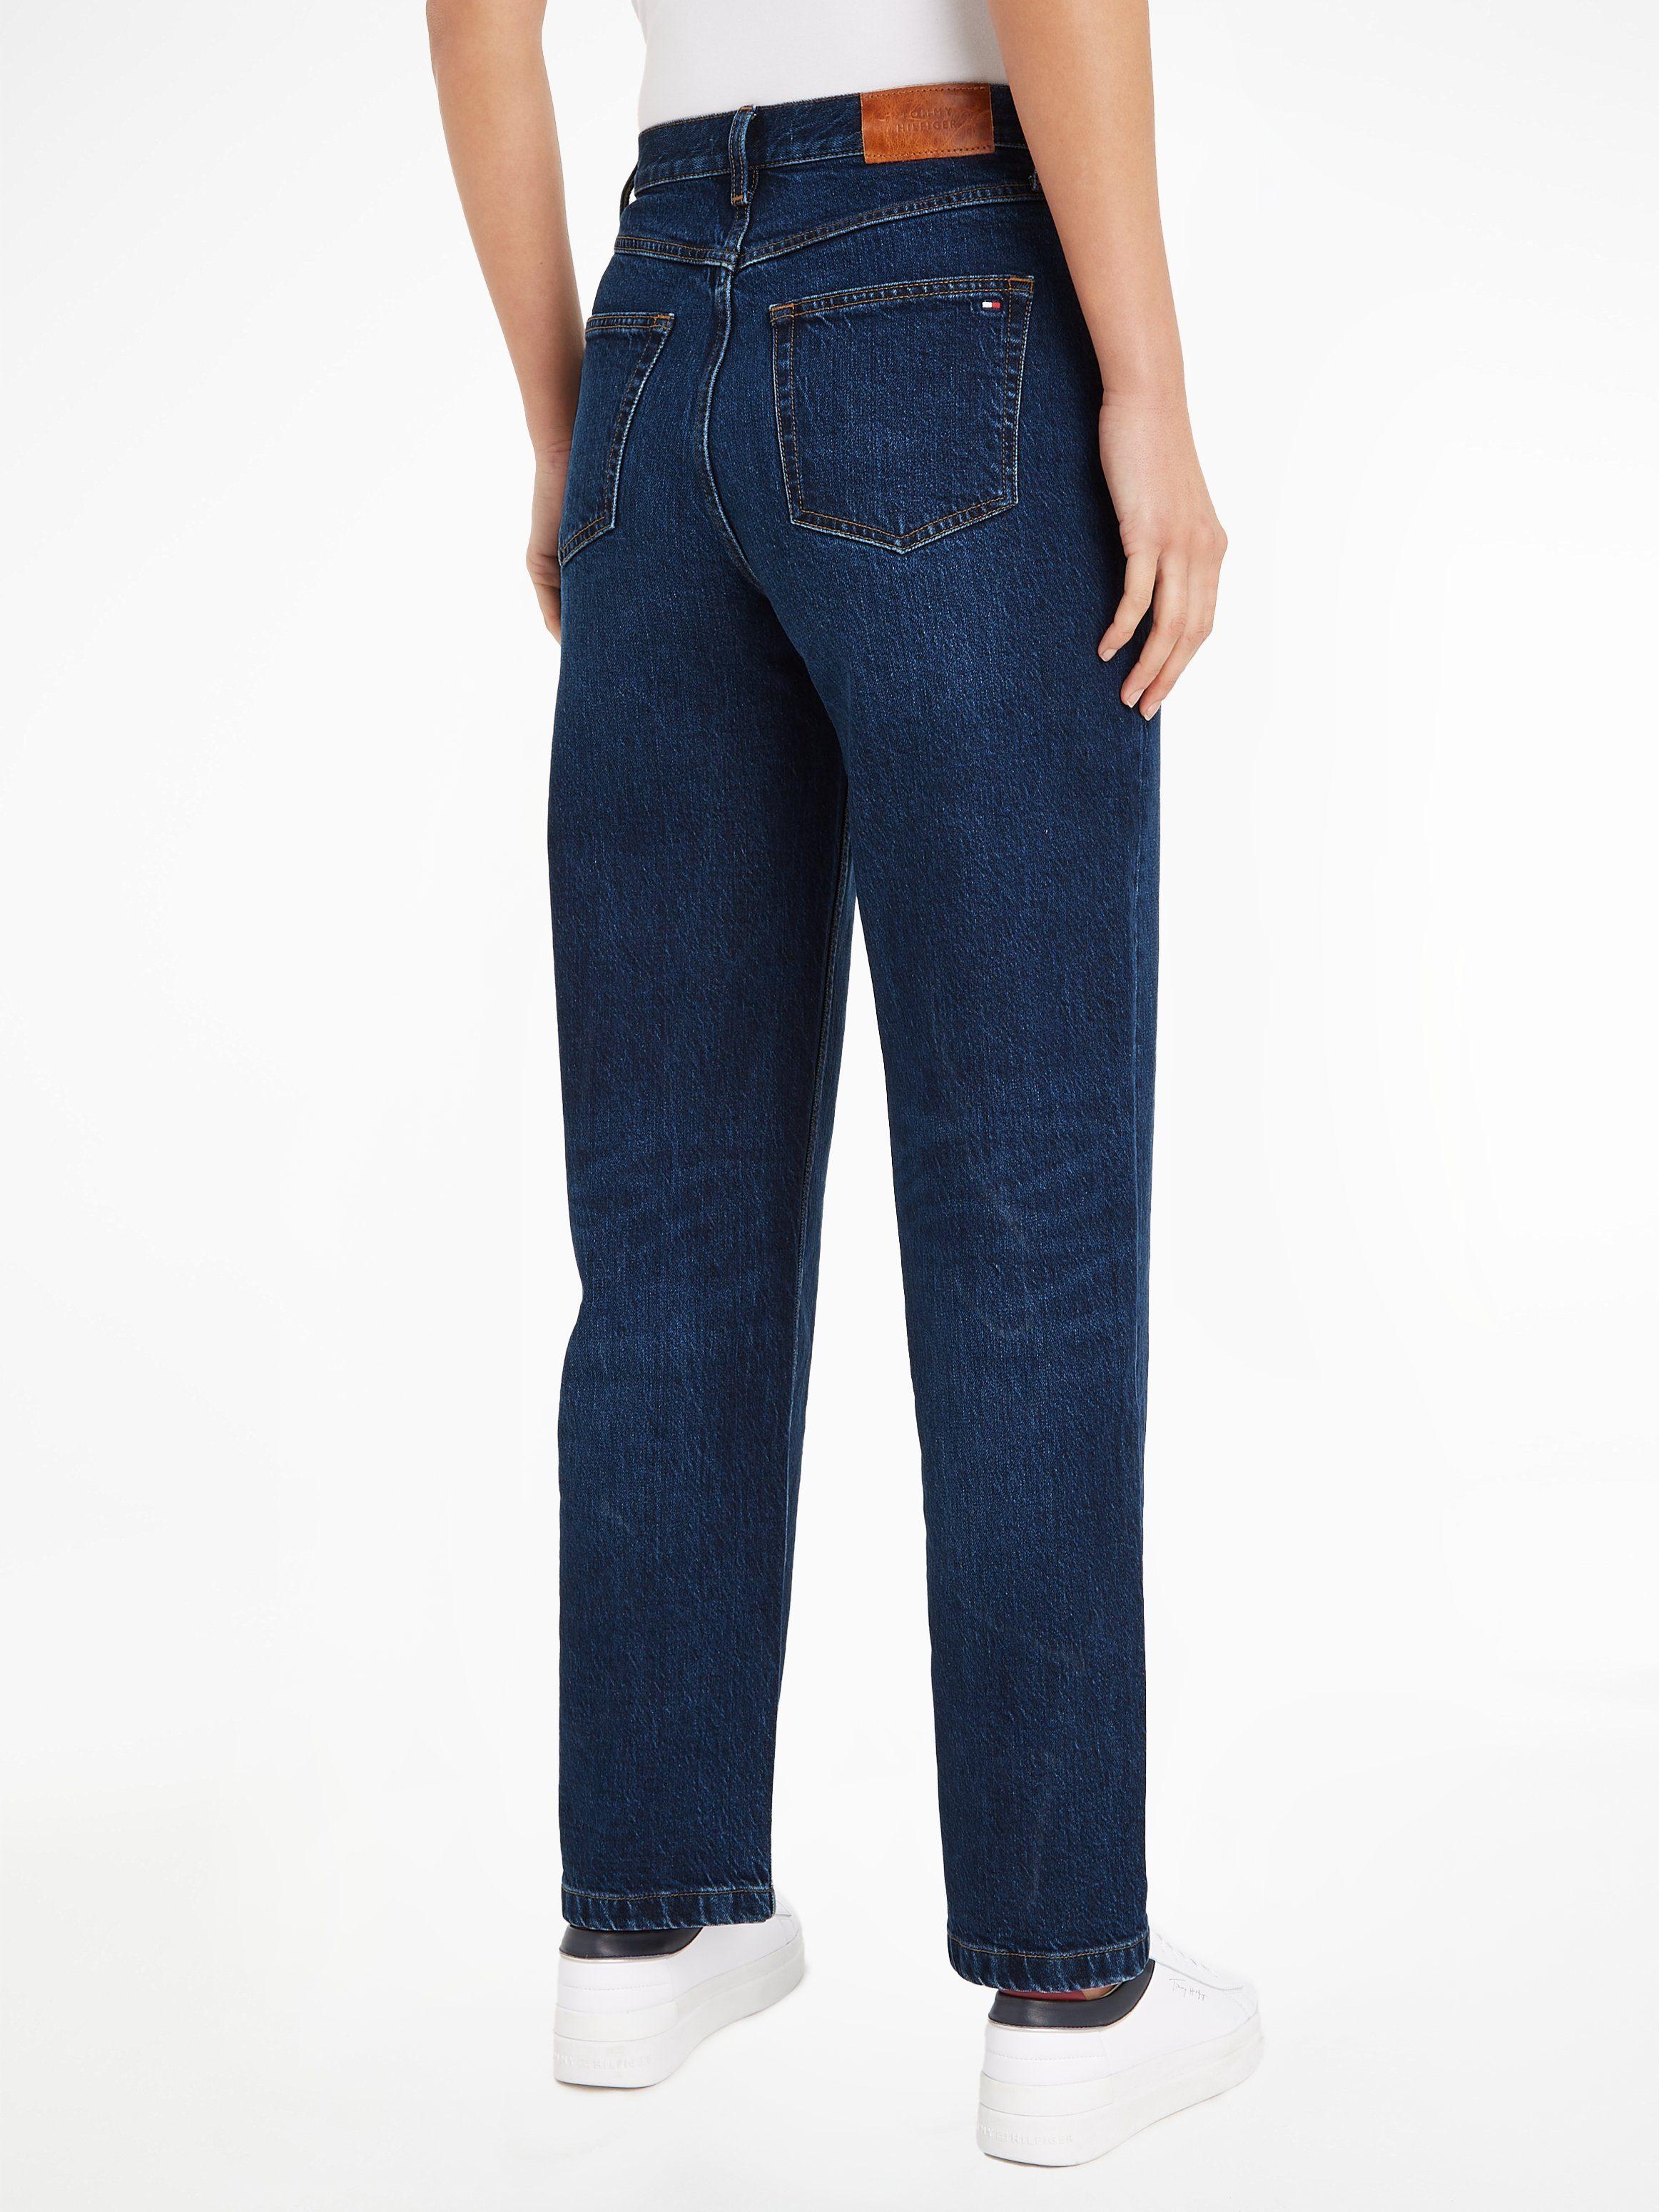 Tommy Hilfiger Relax-fit-Jeans RELAXED STRAIGHT HW PAM in weißer Waschung  in Blau | Lyst DE